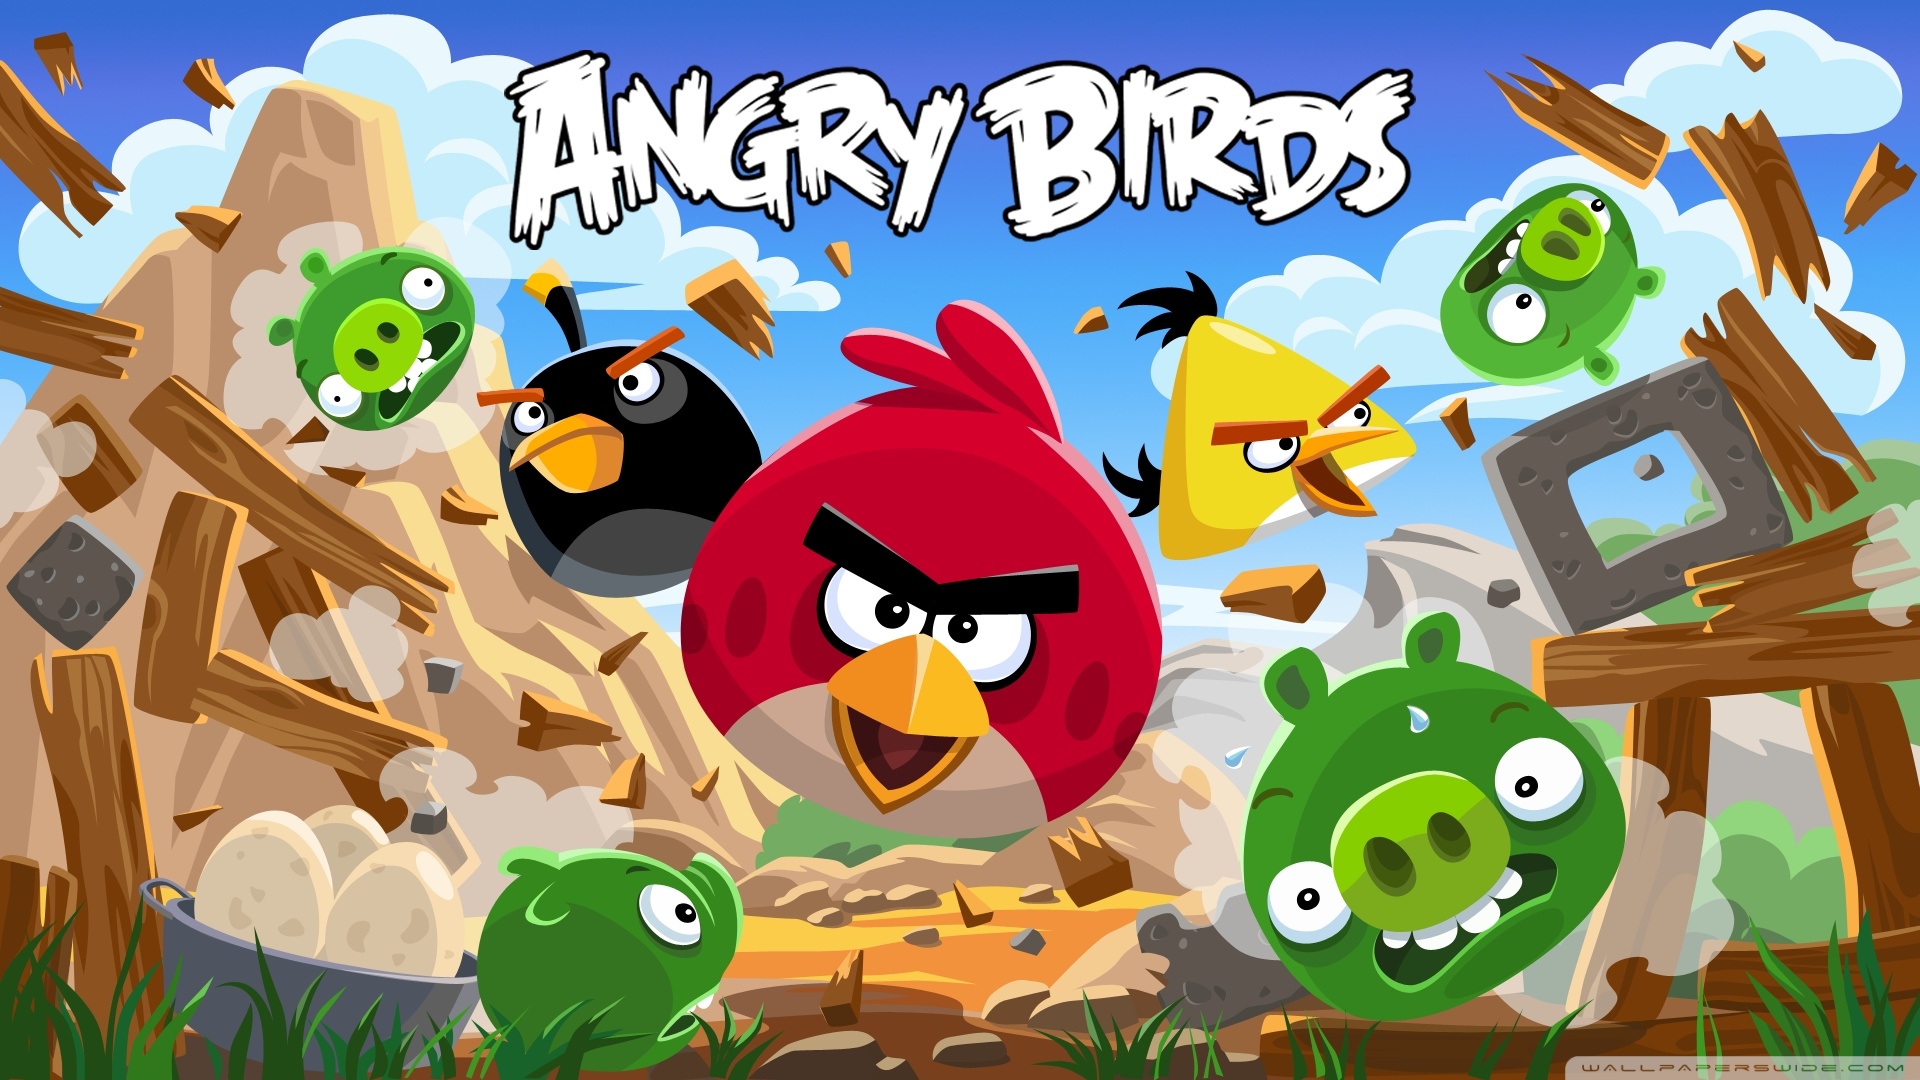 Angry Birds New Version HD Wide Wallpaper for Widescreen